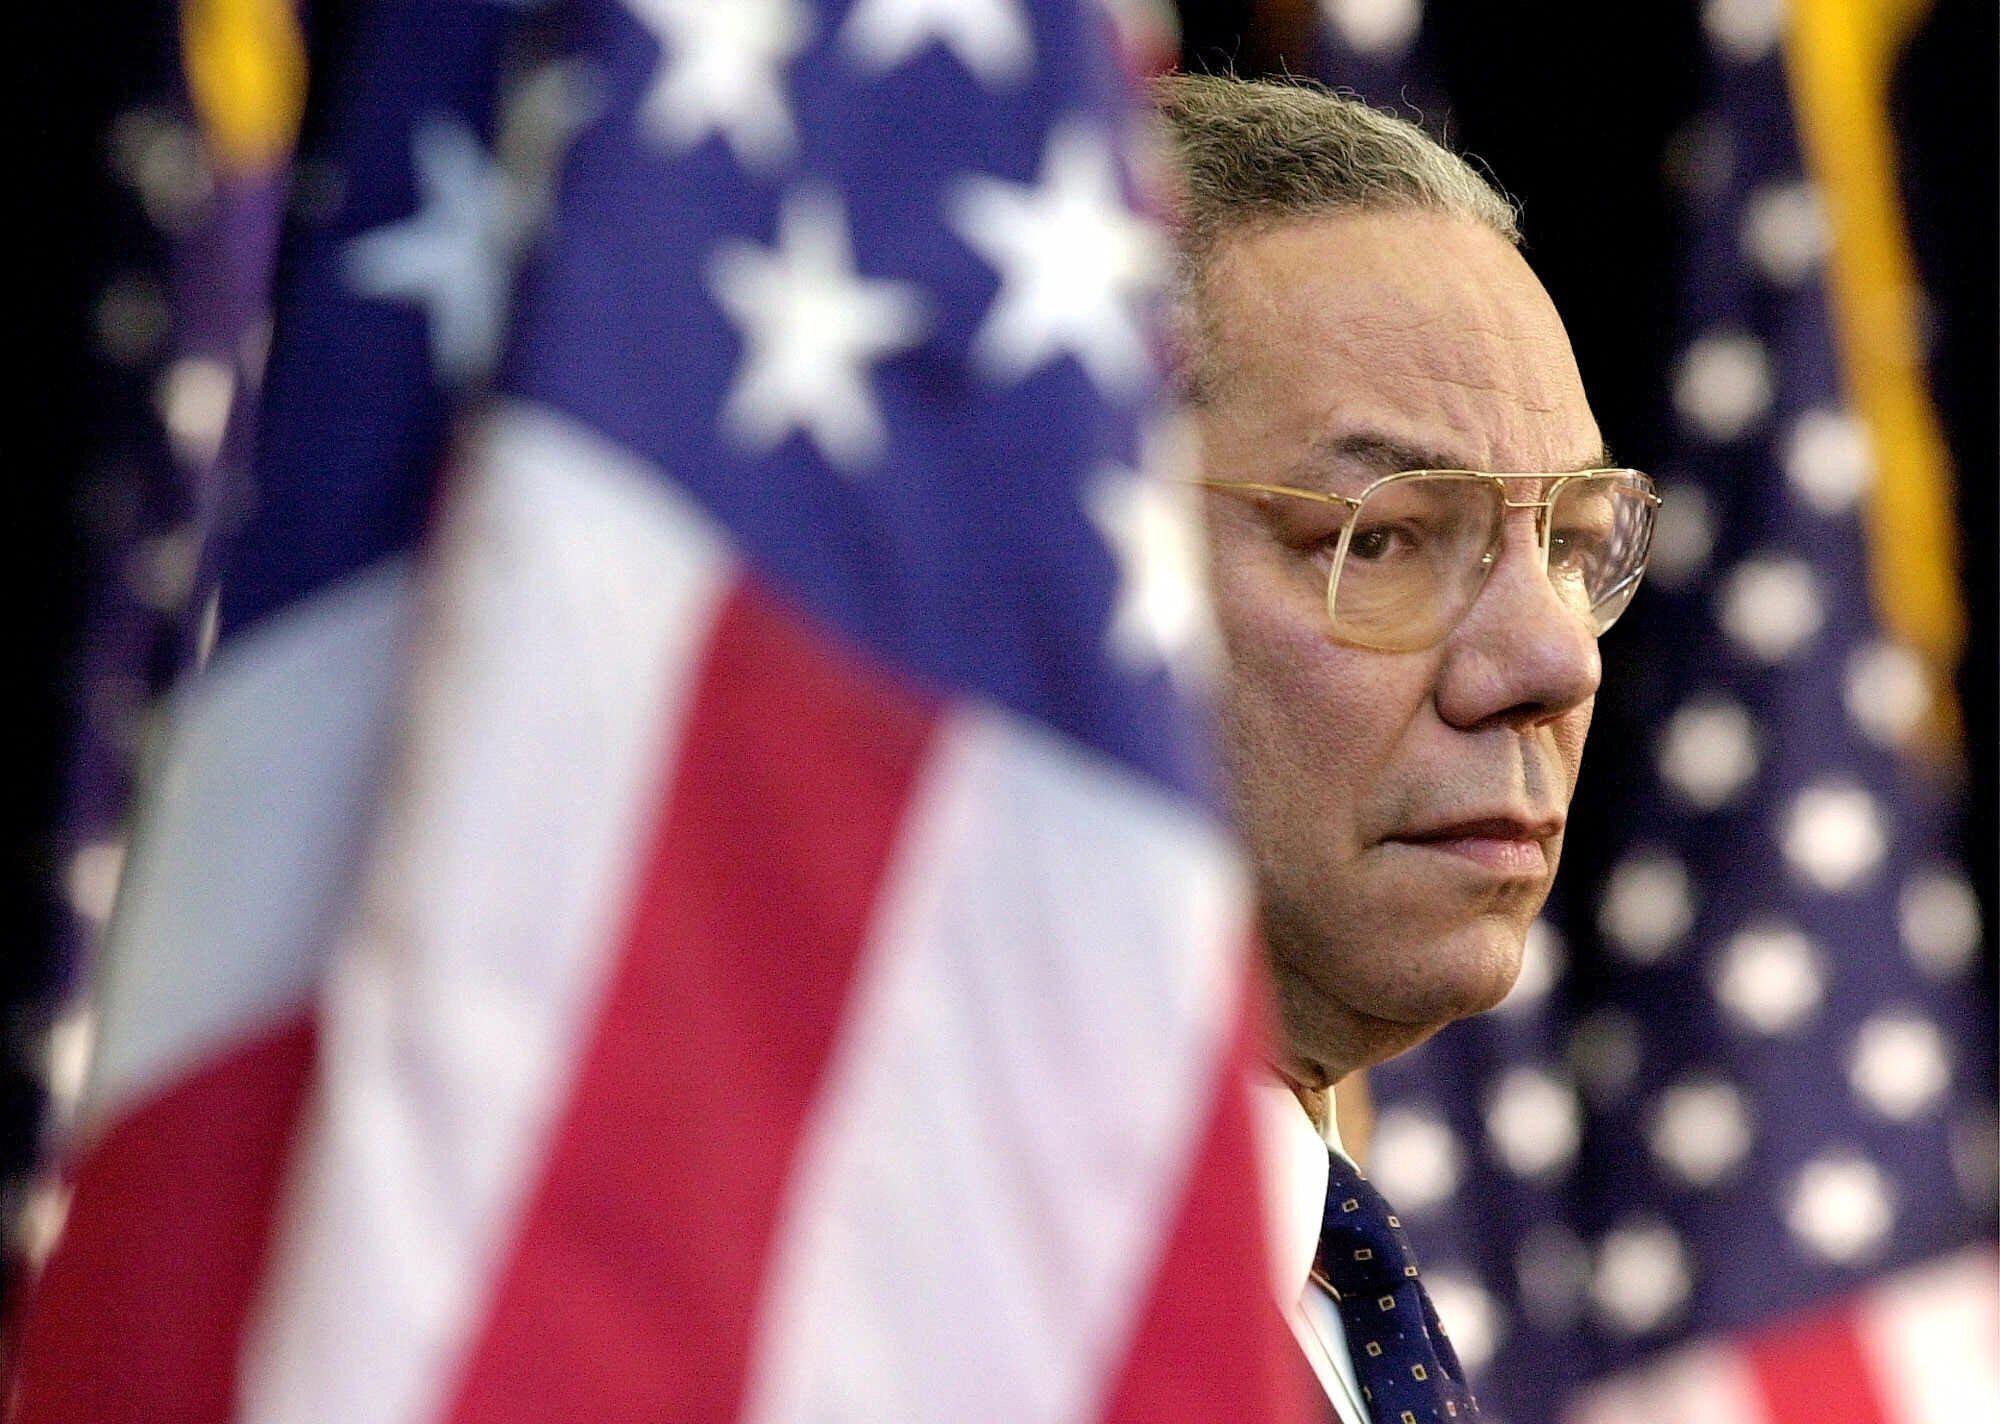 Colin Powell has died of COVID-19 complications family says